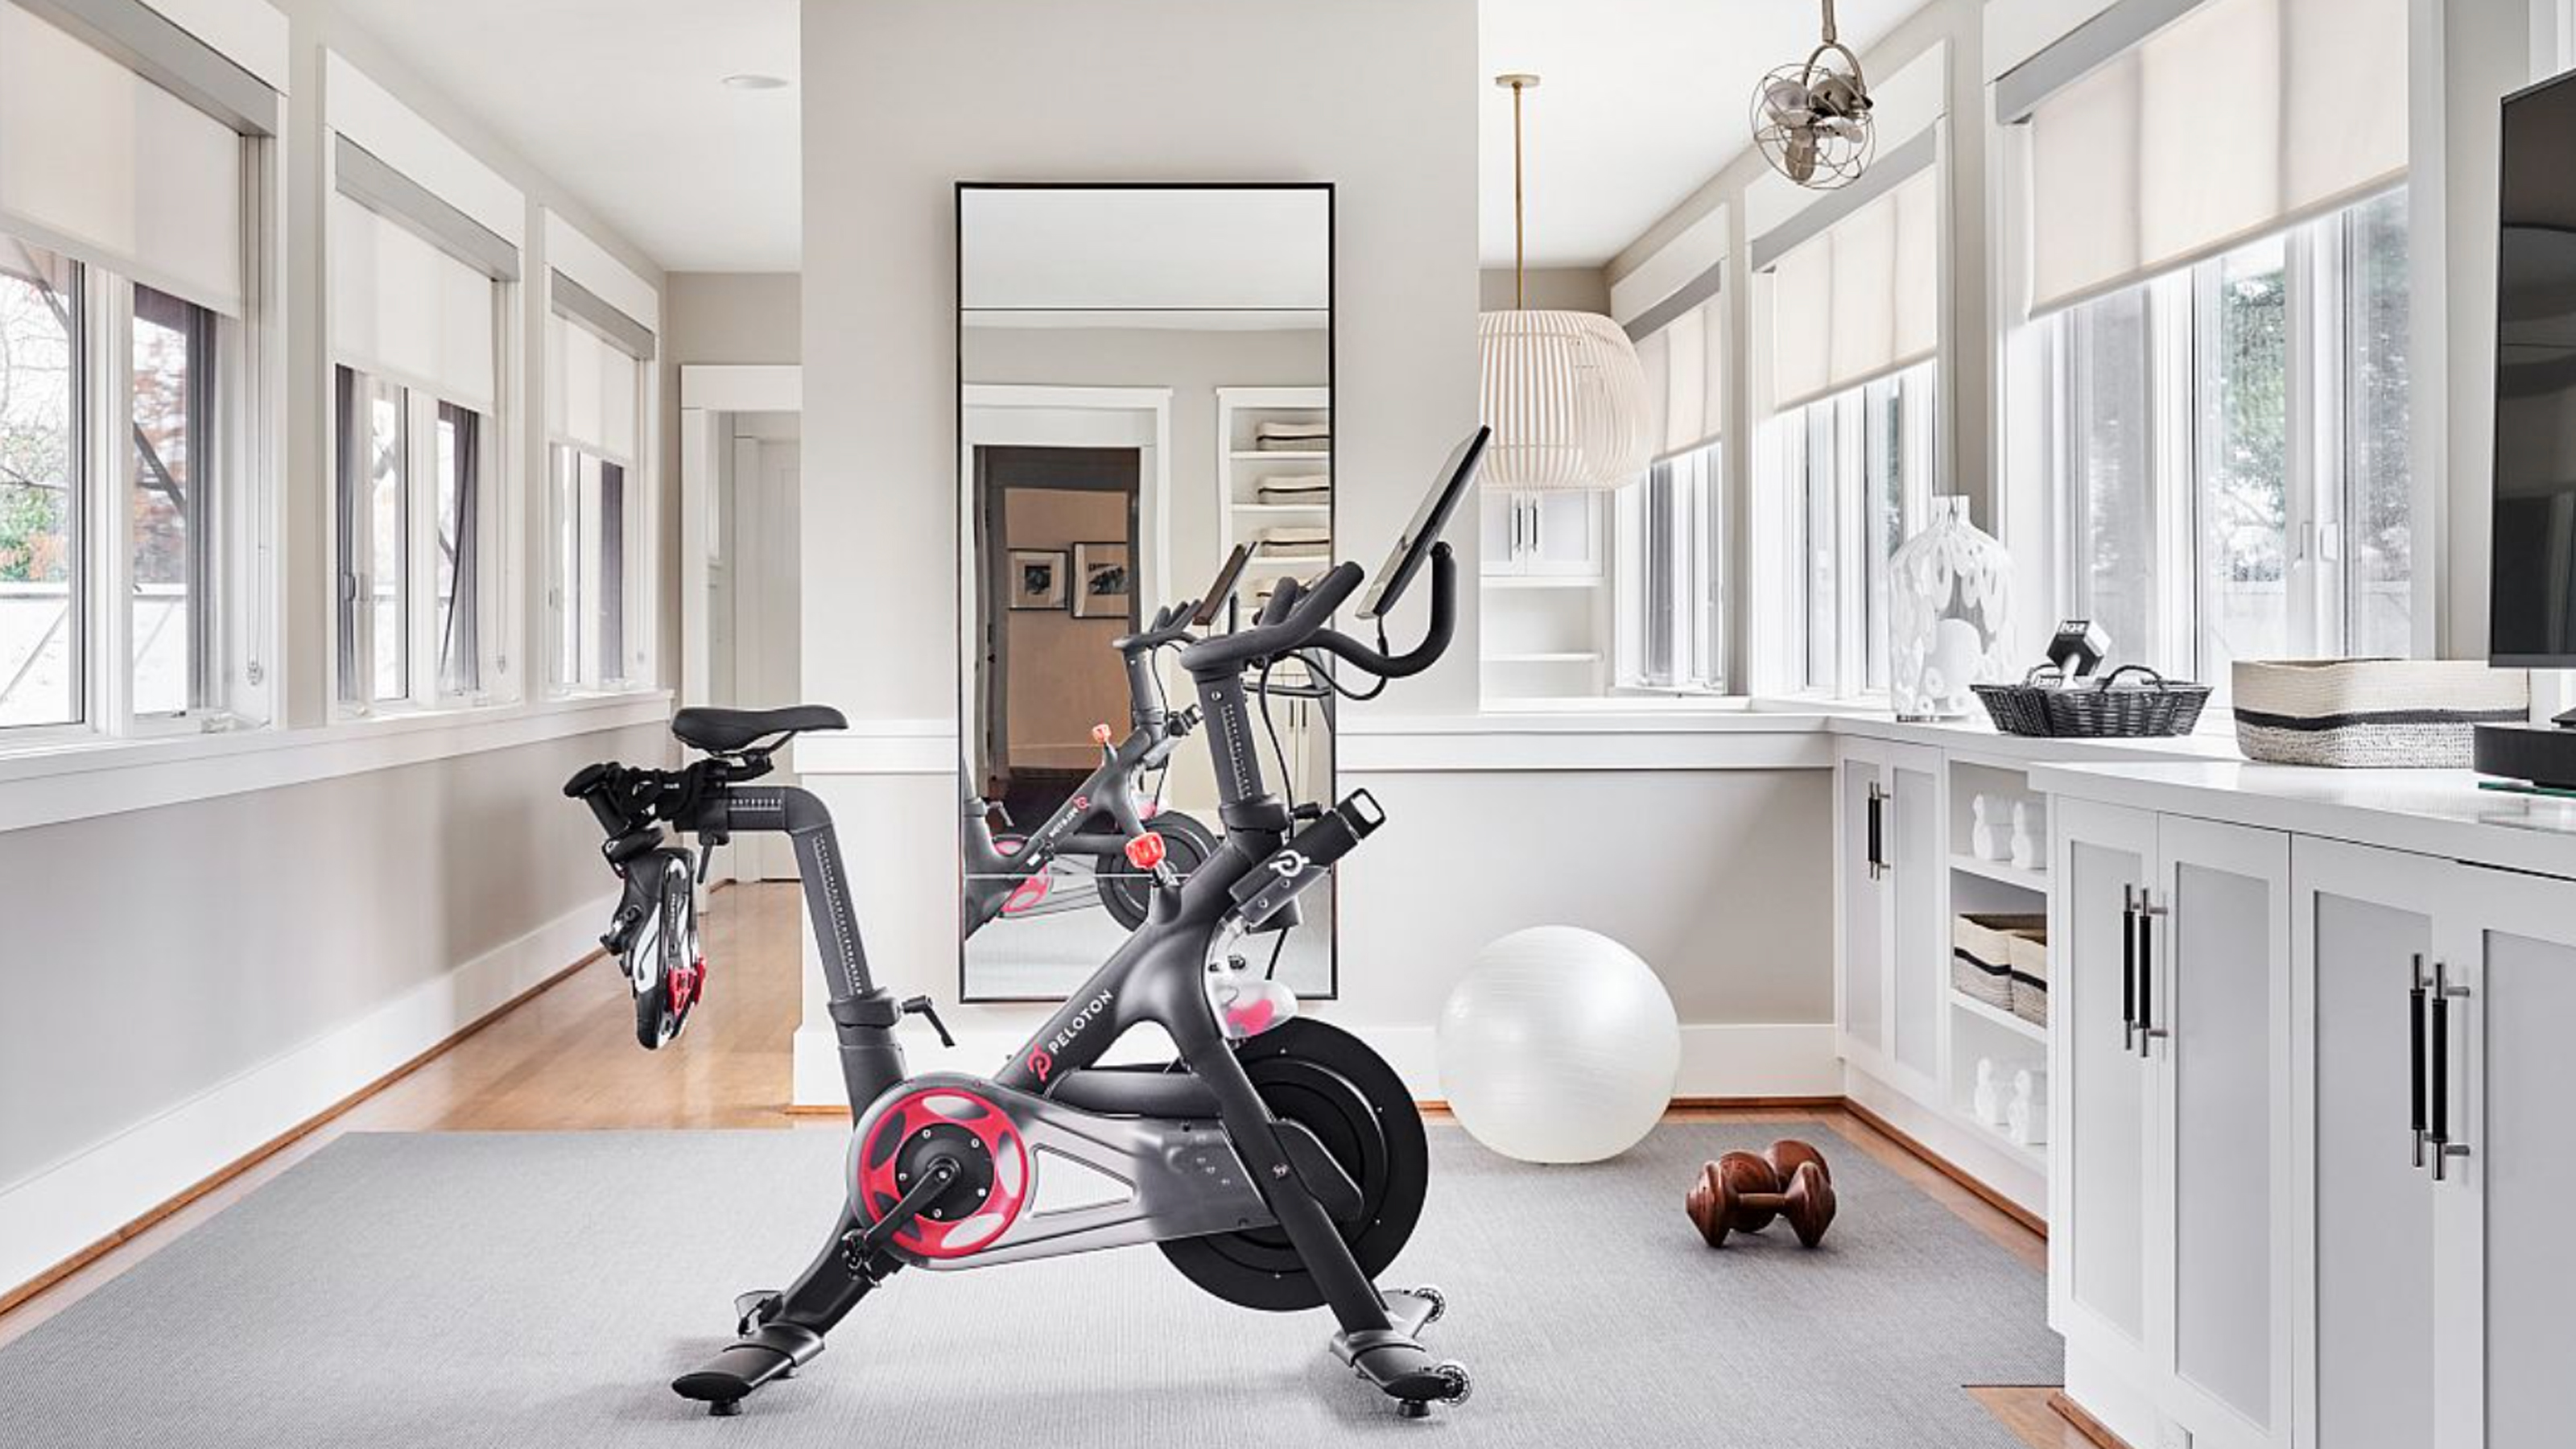 No room ? Consider a workout space in the hallway